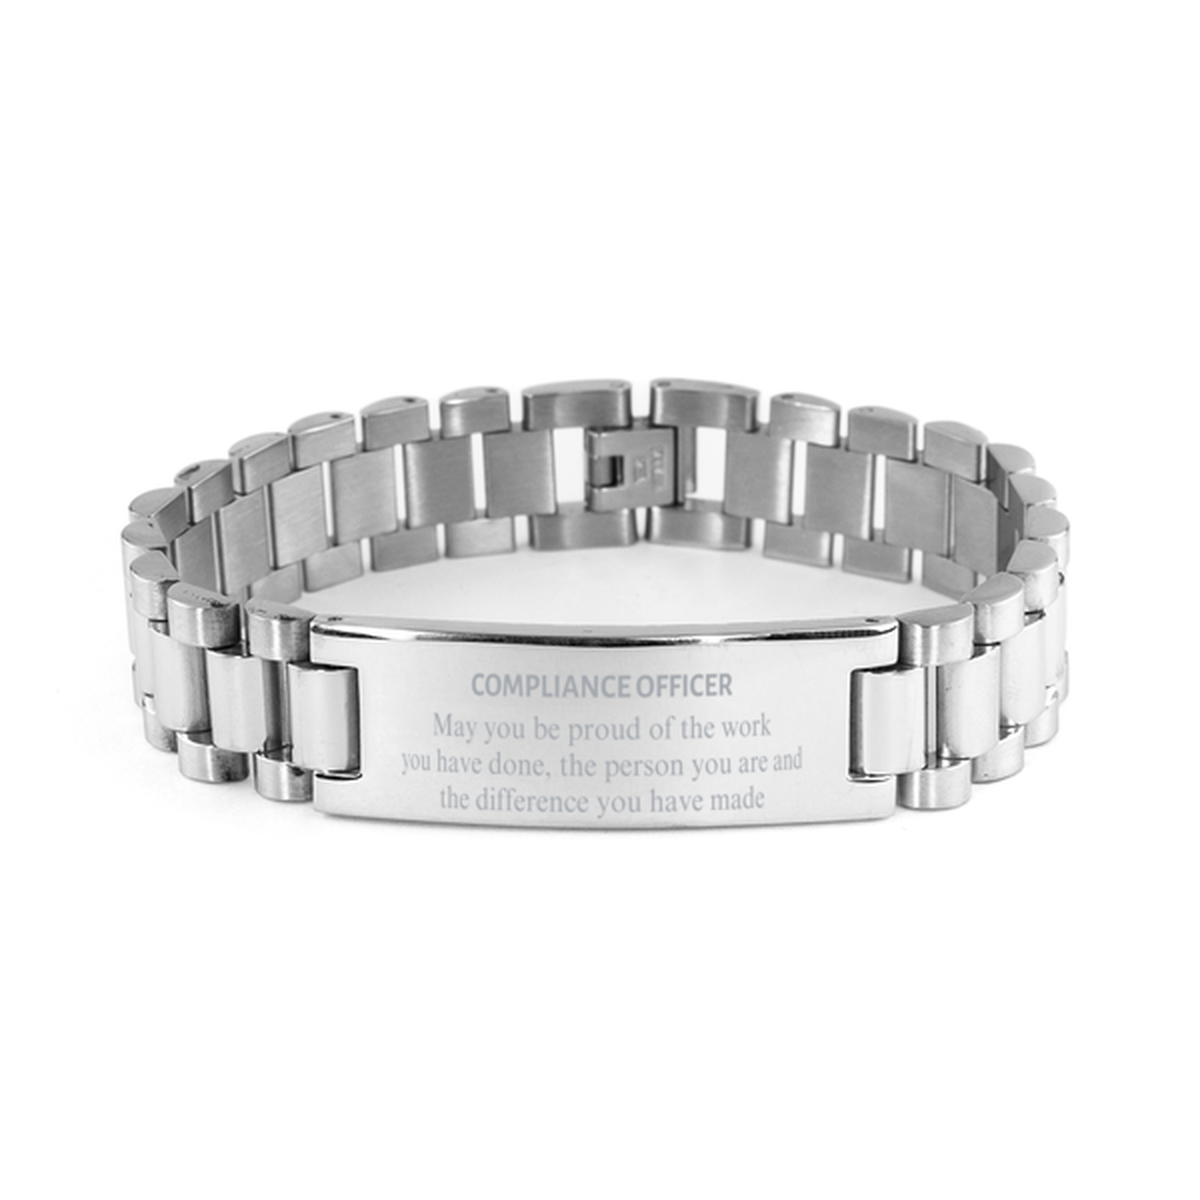 Compliance Officer May you be proud of the work you have done, Retirement Compliance Officer Ladder Stainless Steel Bracelet for Colleague Appreciation Gifts Amazing for Compliance Officer